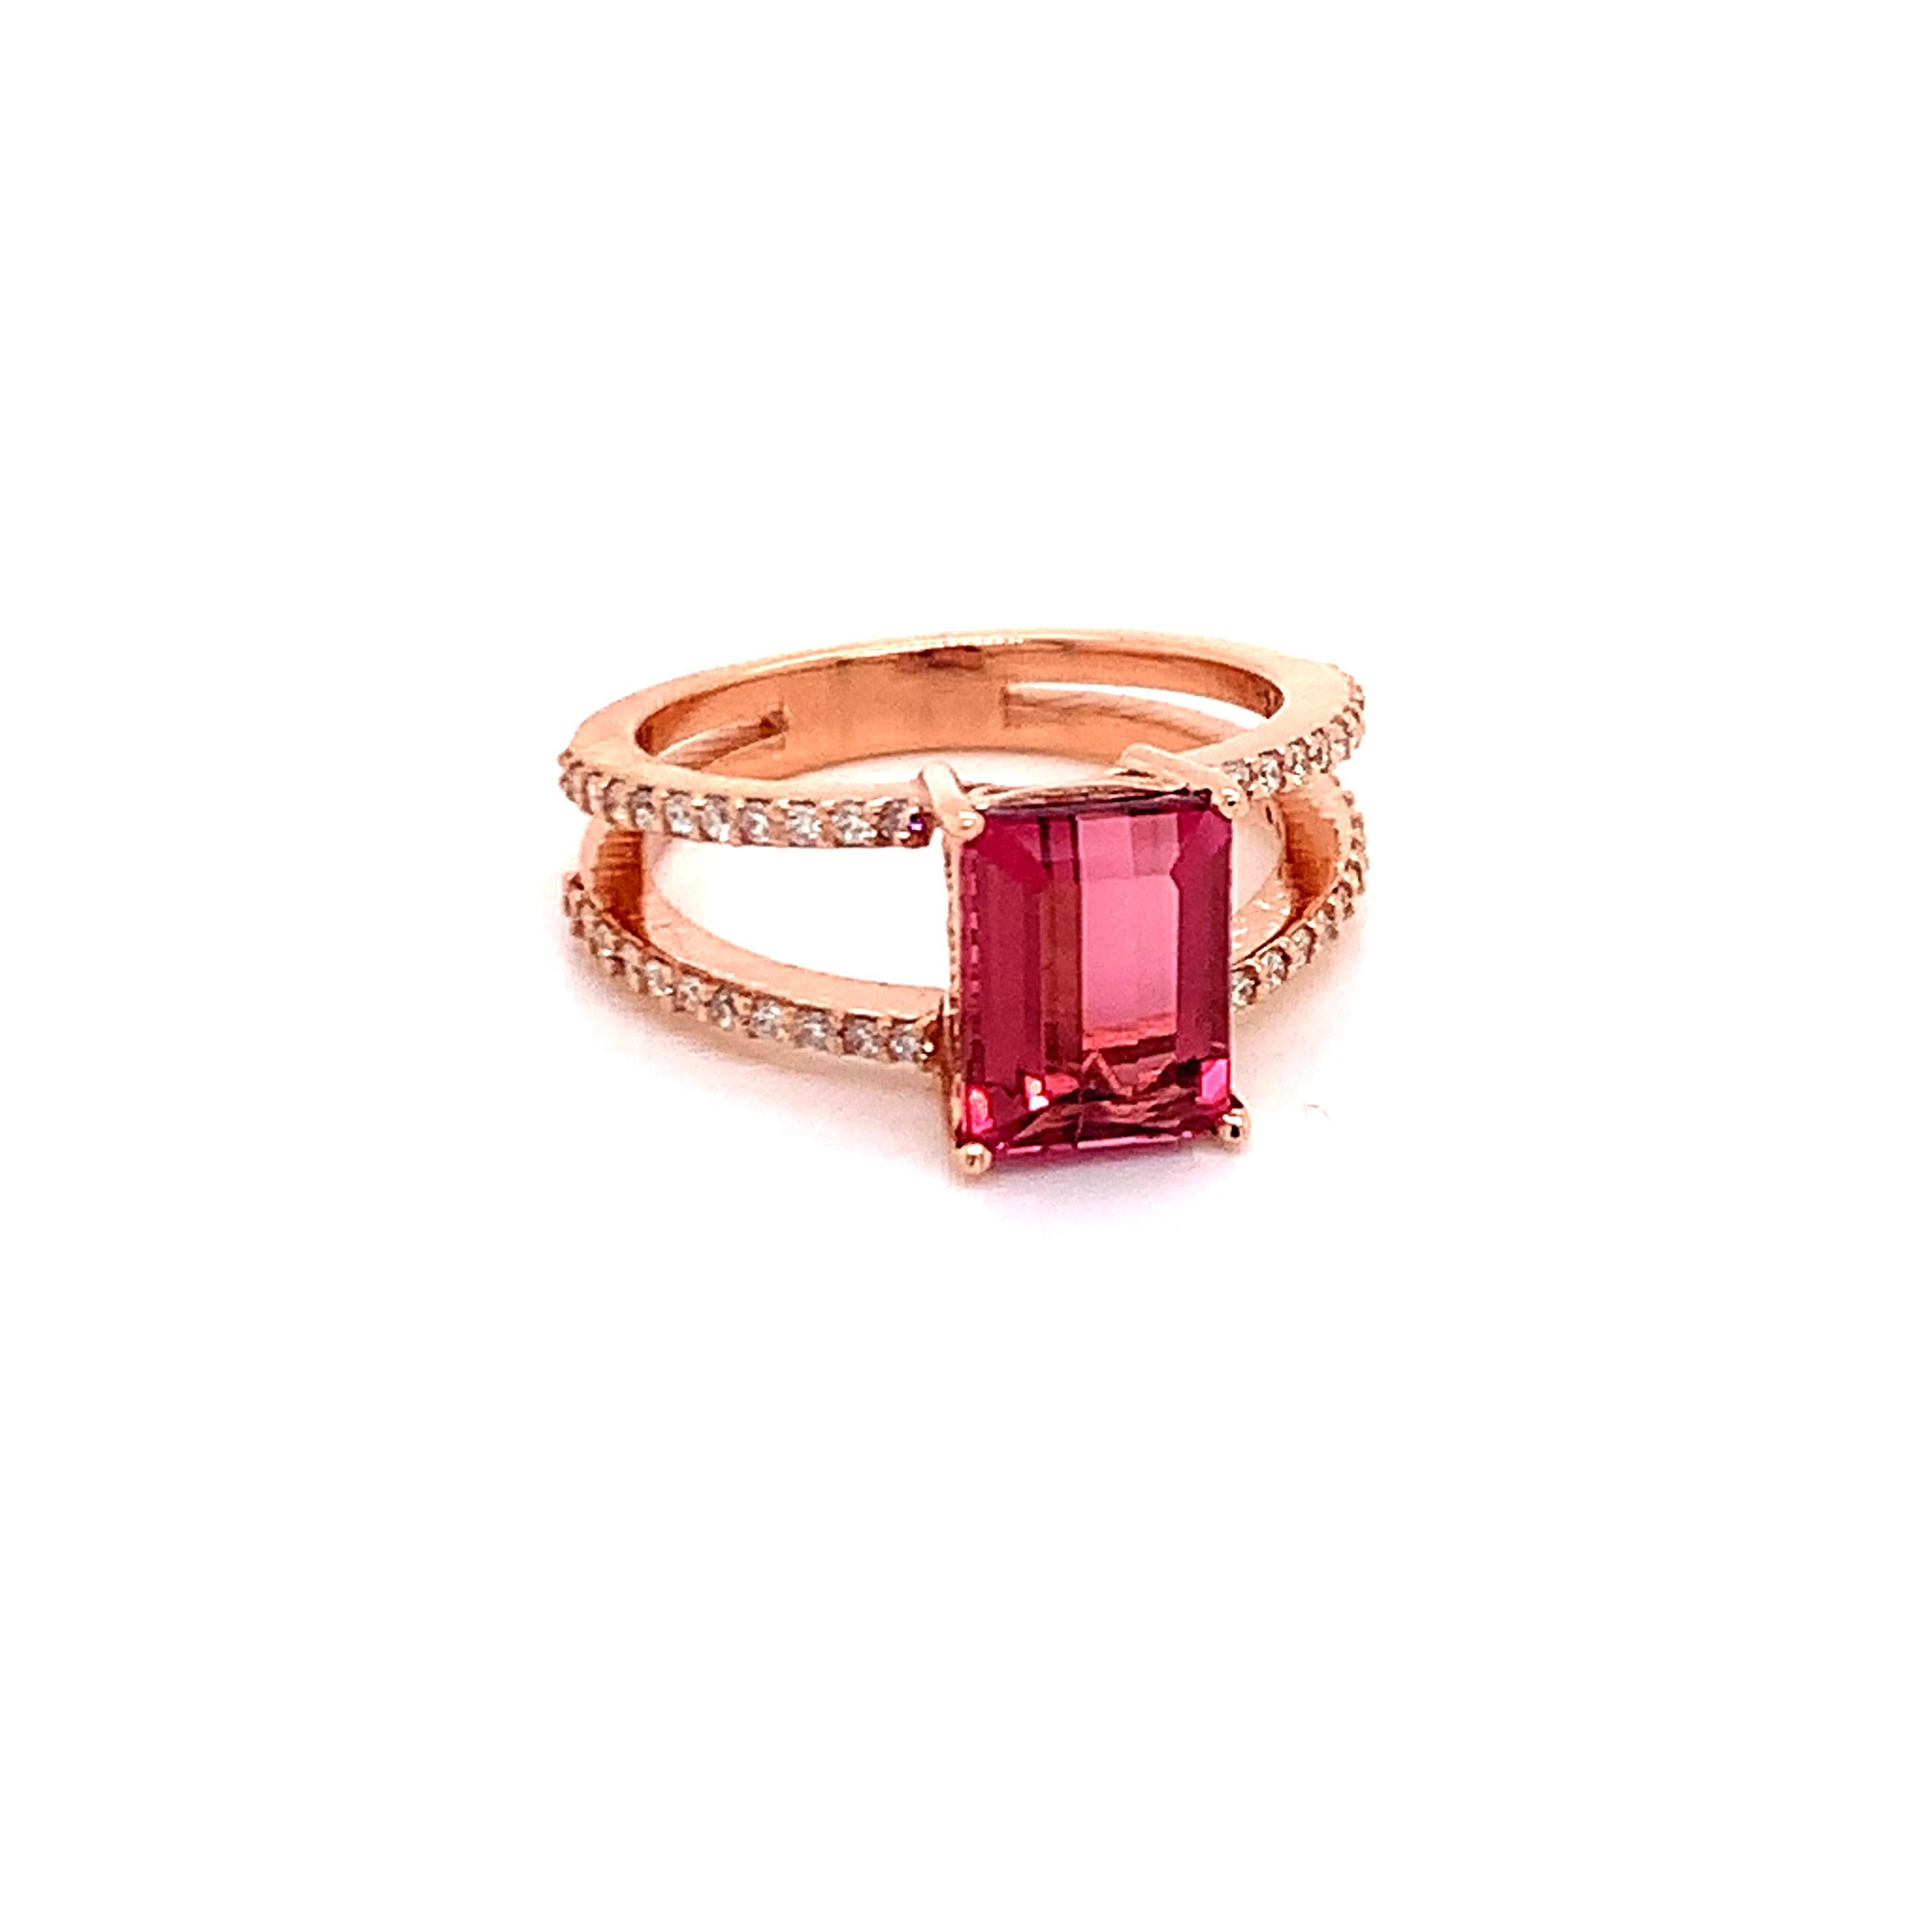 Natural Tourmaline Diamond Ring 14k Rose Gold 2.2 TCW Certified For Sale 5